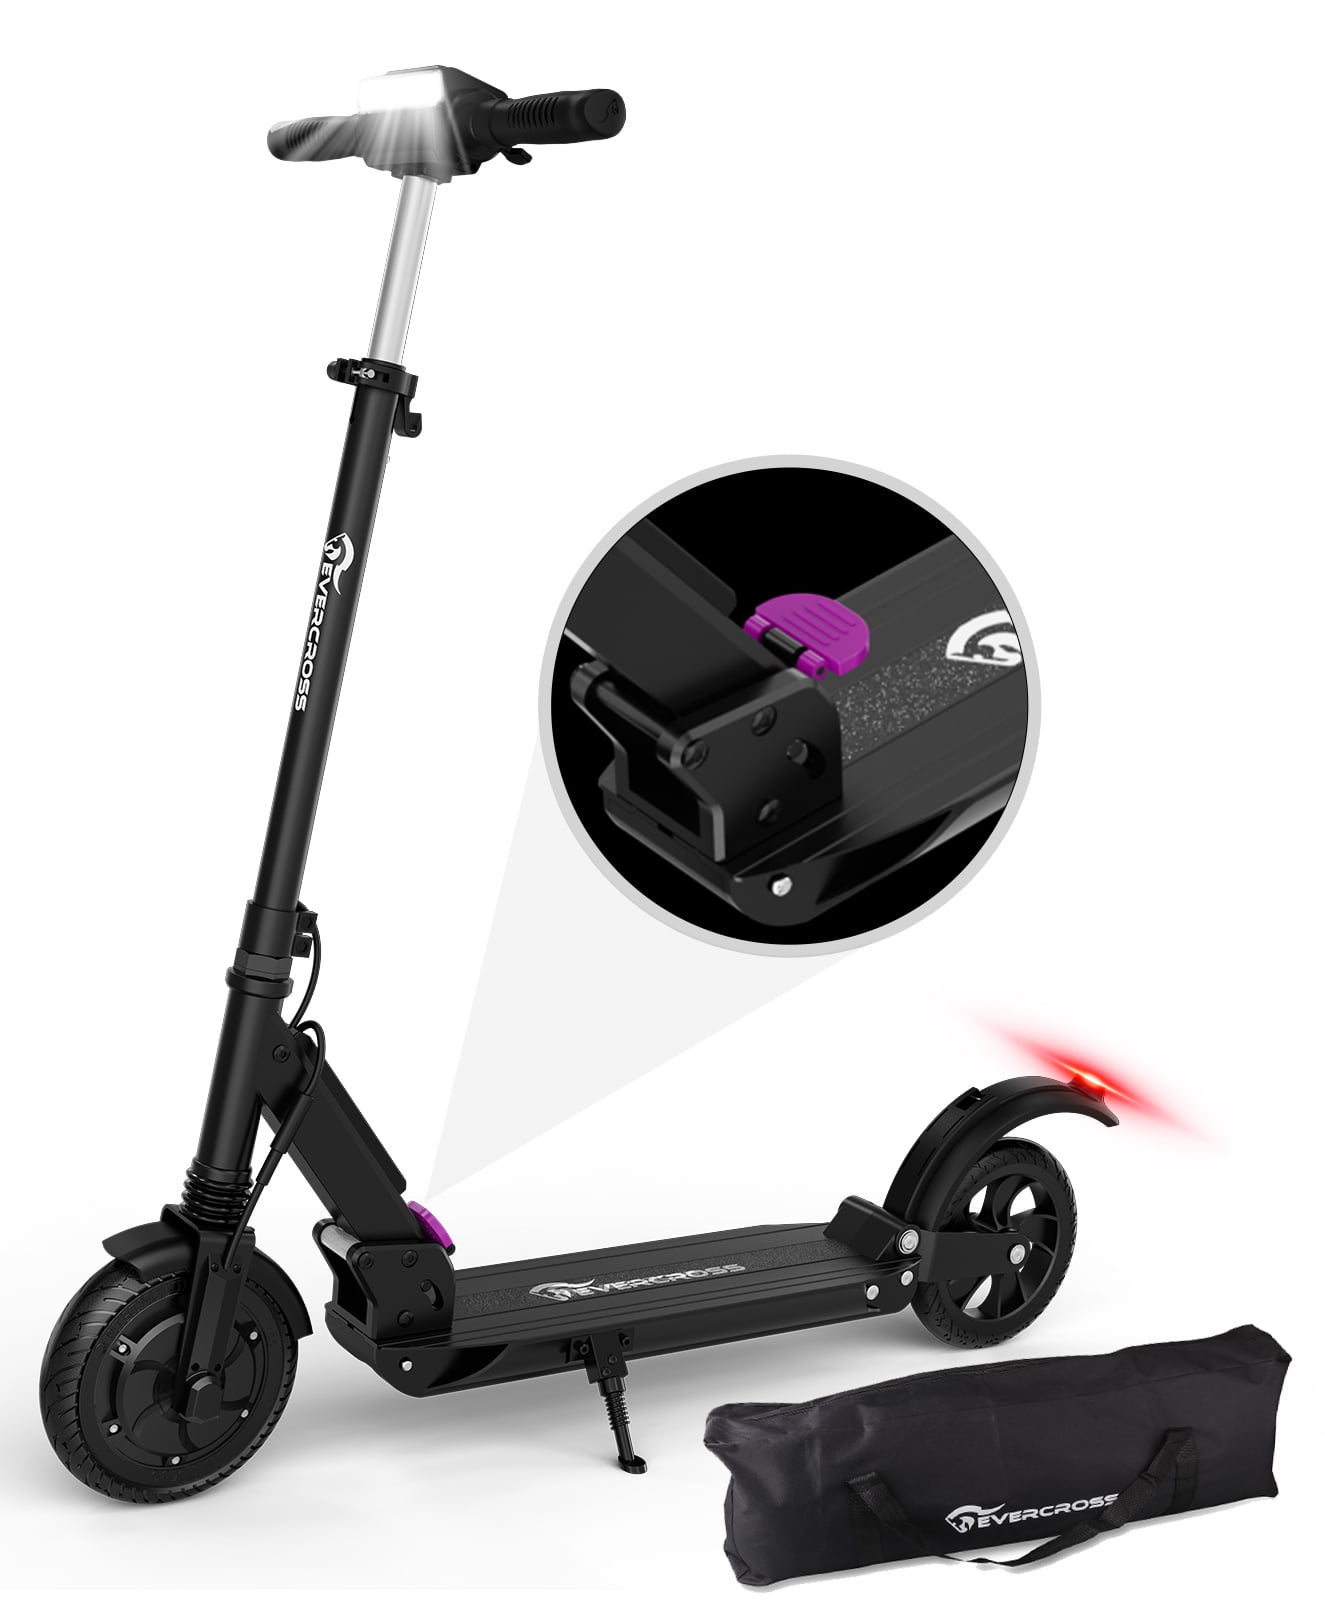 Max Load 250lbs Commuting Motorized Scooter Suitable for Adults & Teenager Dual 350W Motors,18.6Miles Long Range 25 KPH E-Scooter,Portable and Adjustable Design Electric Scooter Adults,Kick Tires 